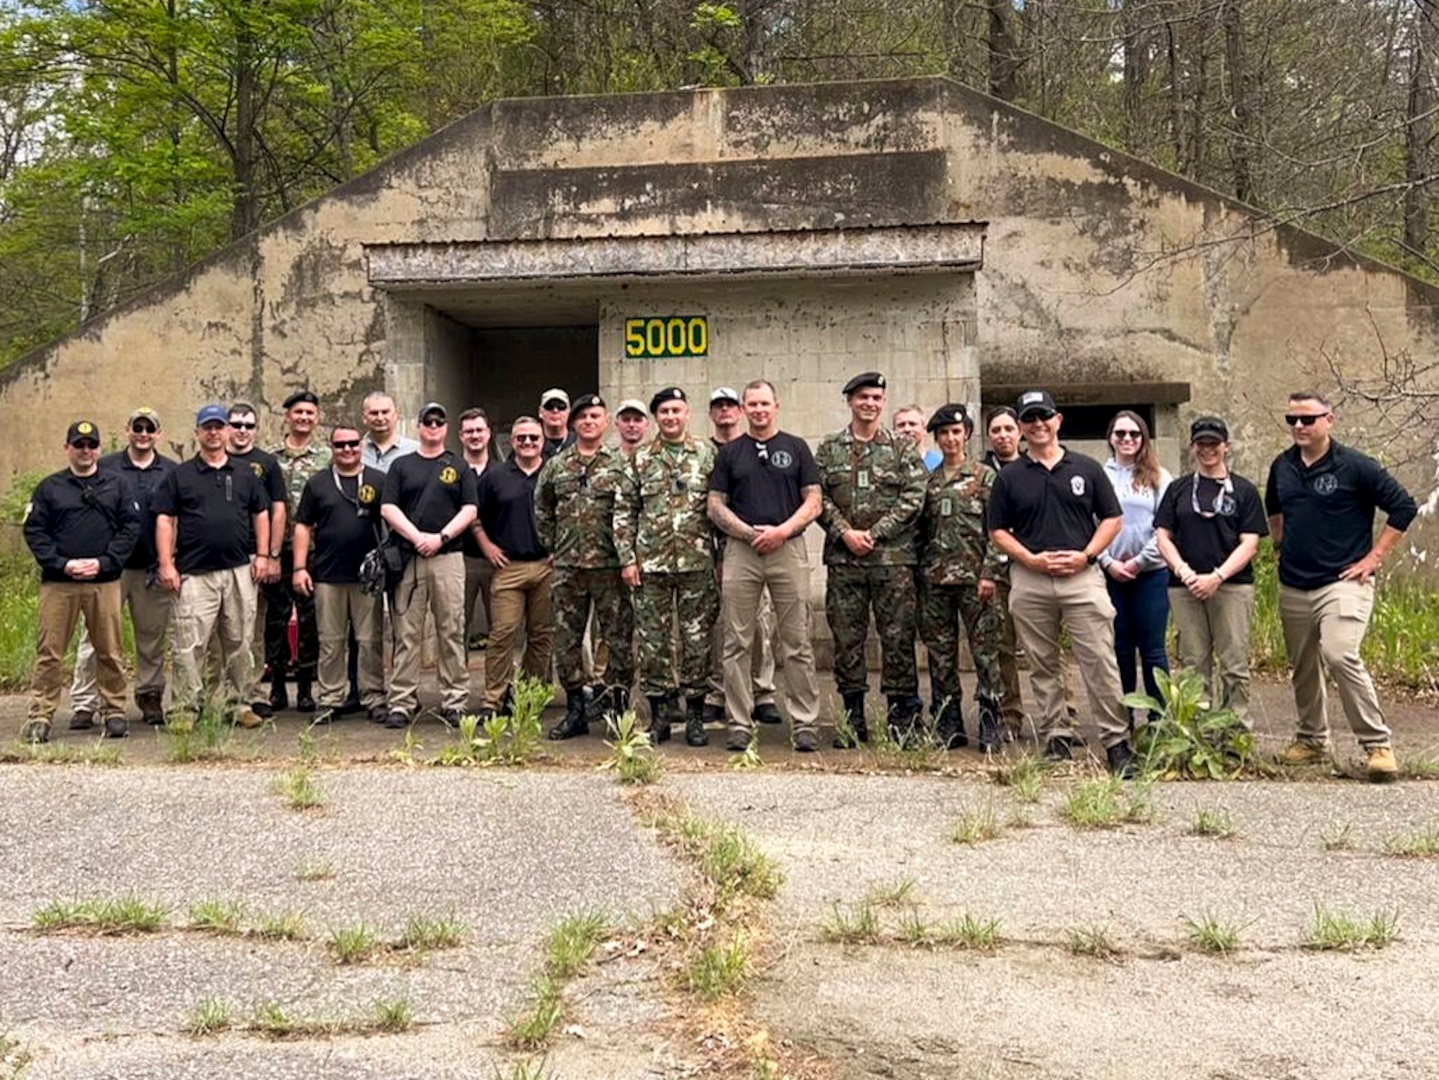 A group photo of the 15th Civil Support Team, Vermont National Guard, and a chemical, biological, radiological and nuclear battalion from the North Macedonia Army during a State Partnership Program engagement in Colchester, Vt., June 6-11, 2022. The engagement focused on working with civil authorities in the event of a disaster.